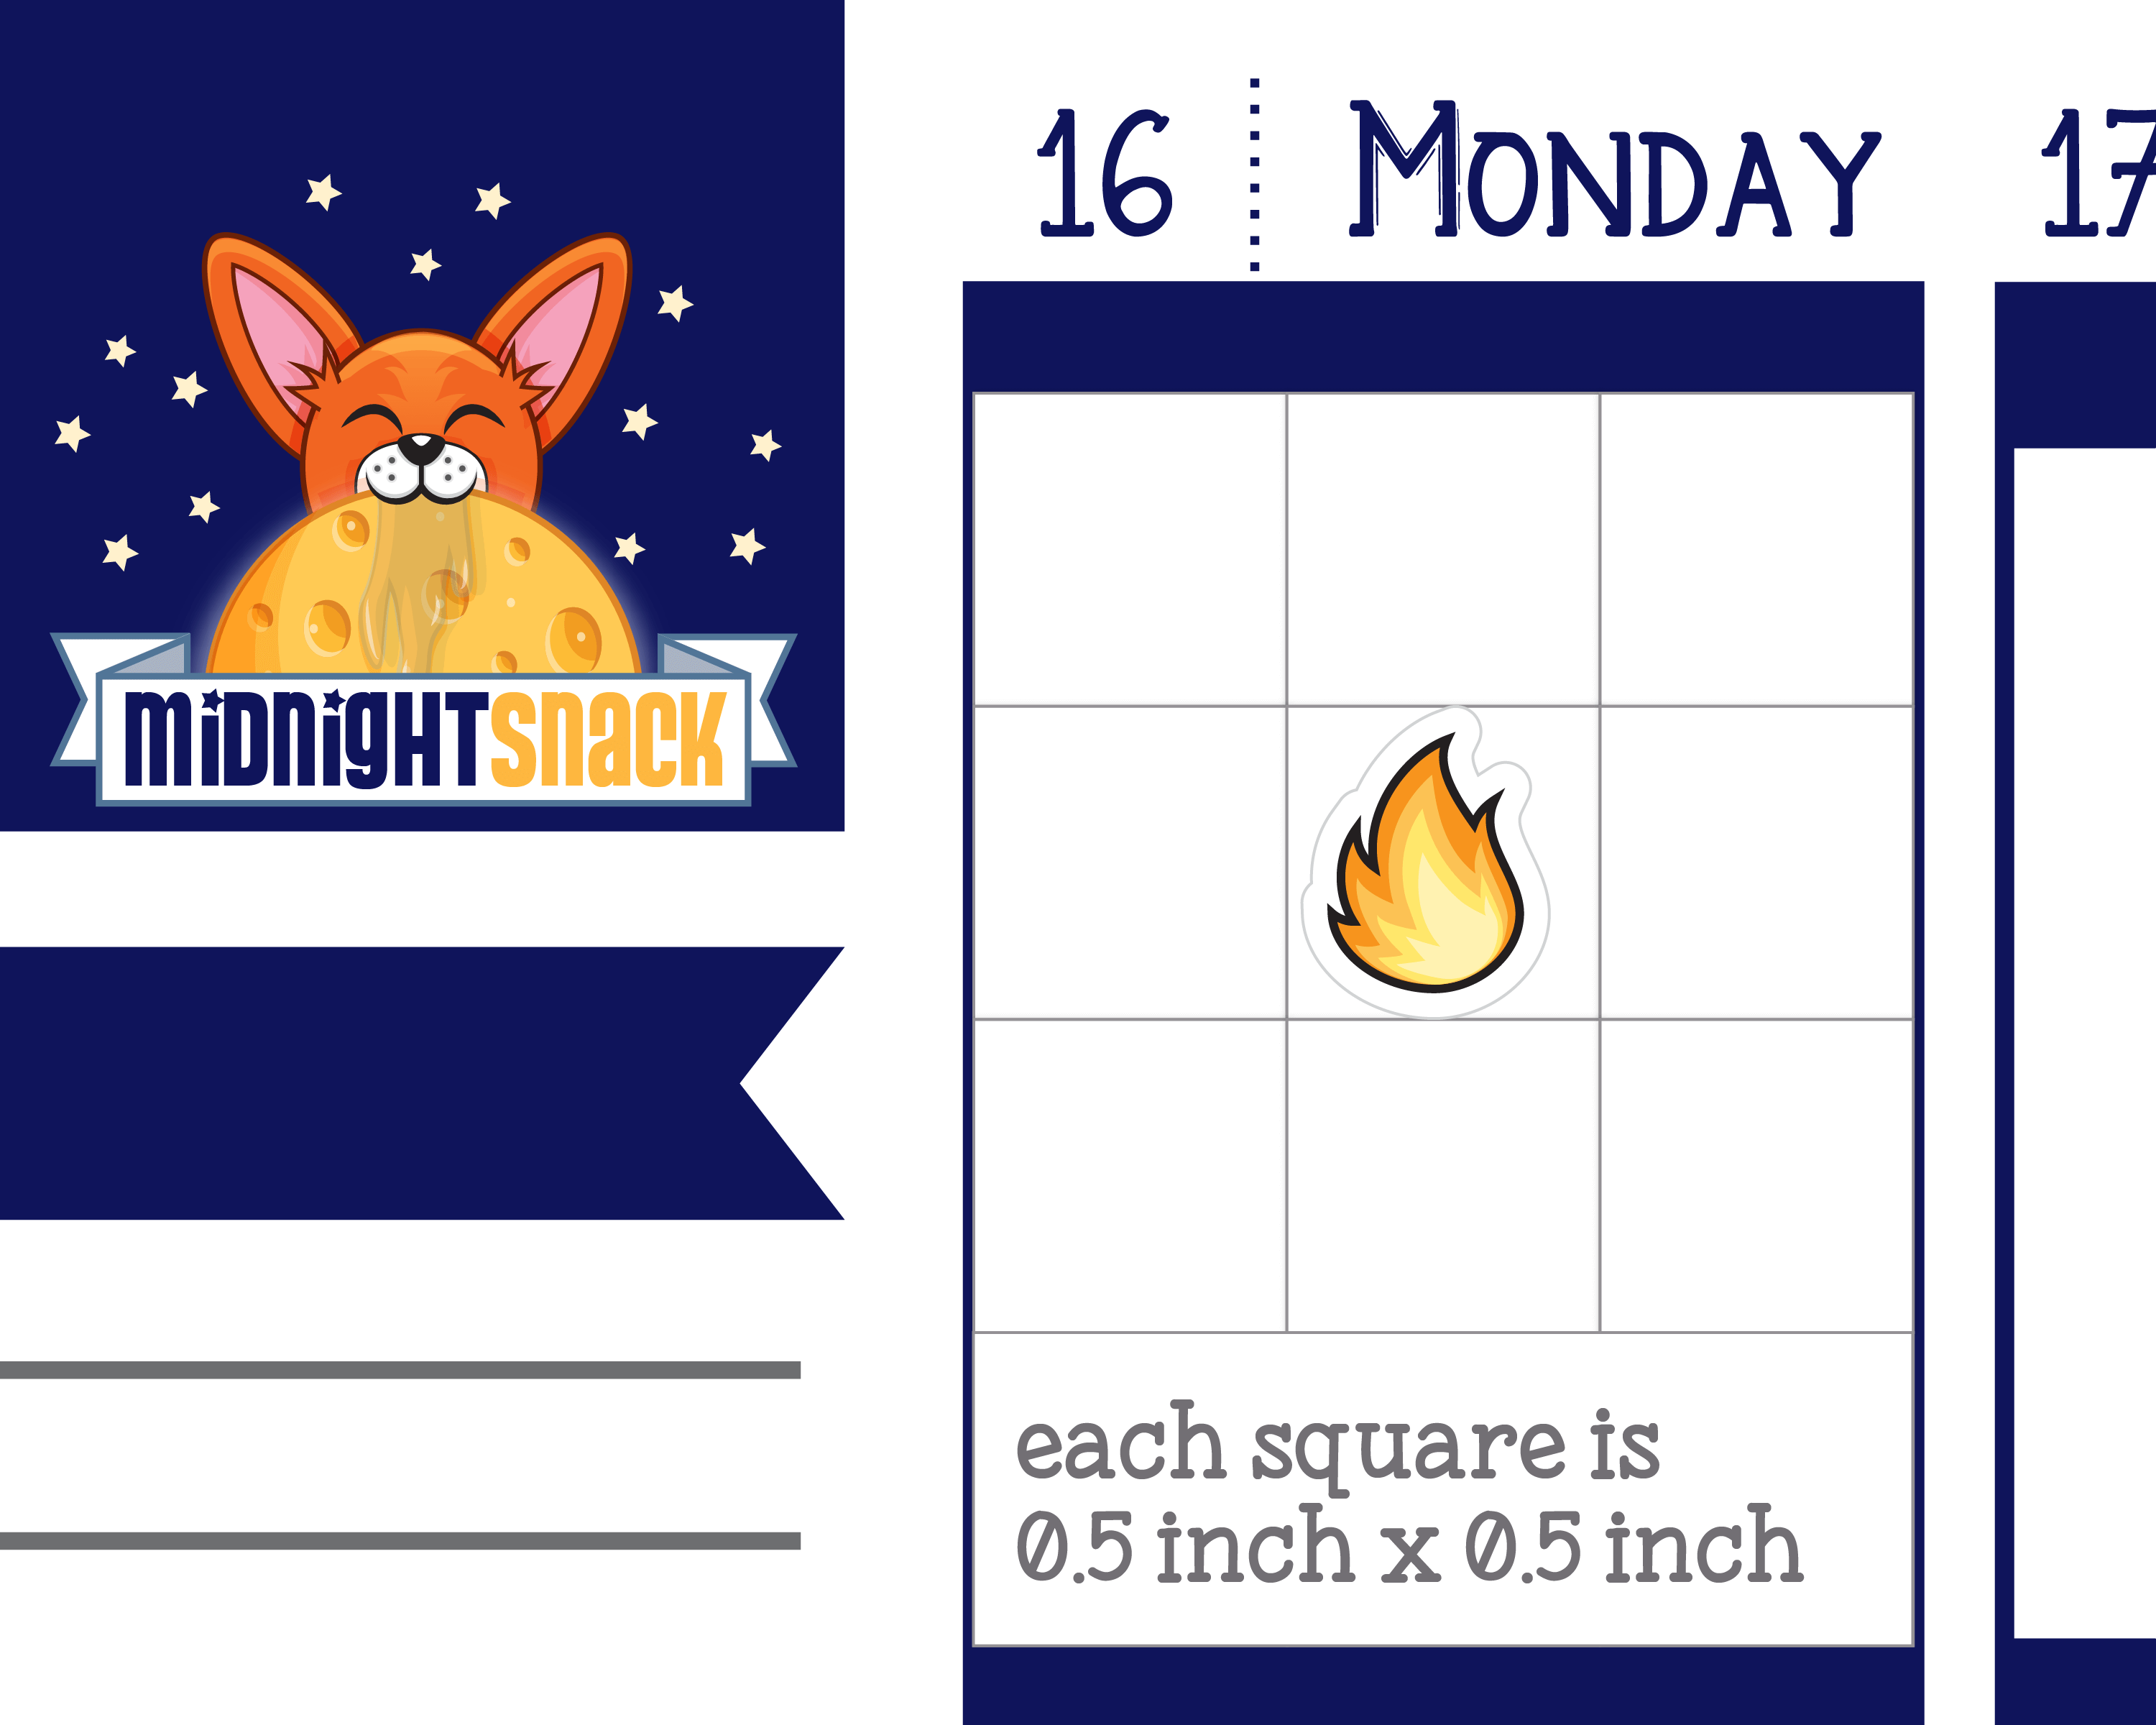 Small Fire Icon: Gas Bill Planner Stickers: Midnight Snack Planner